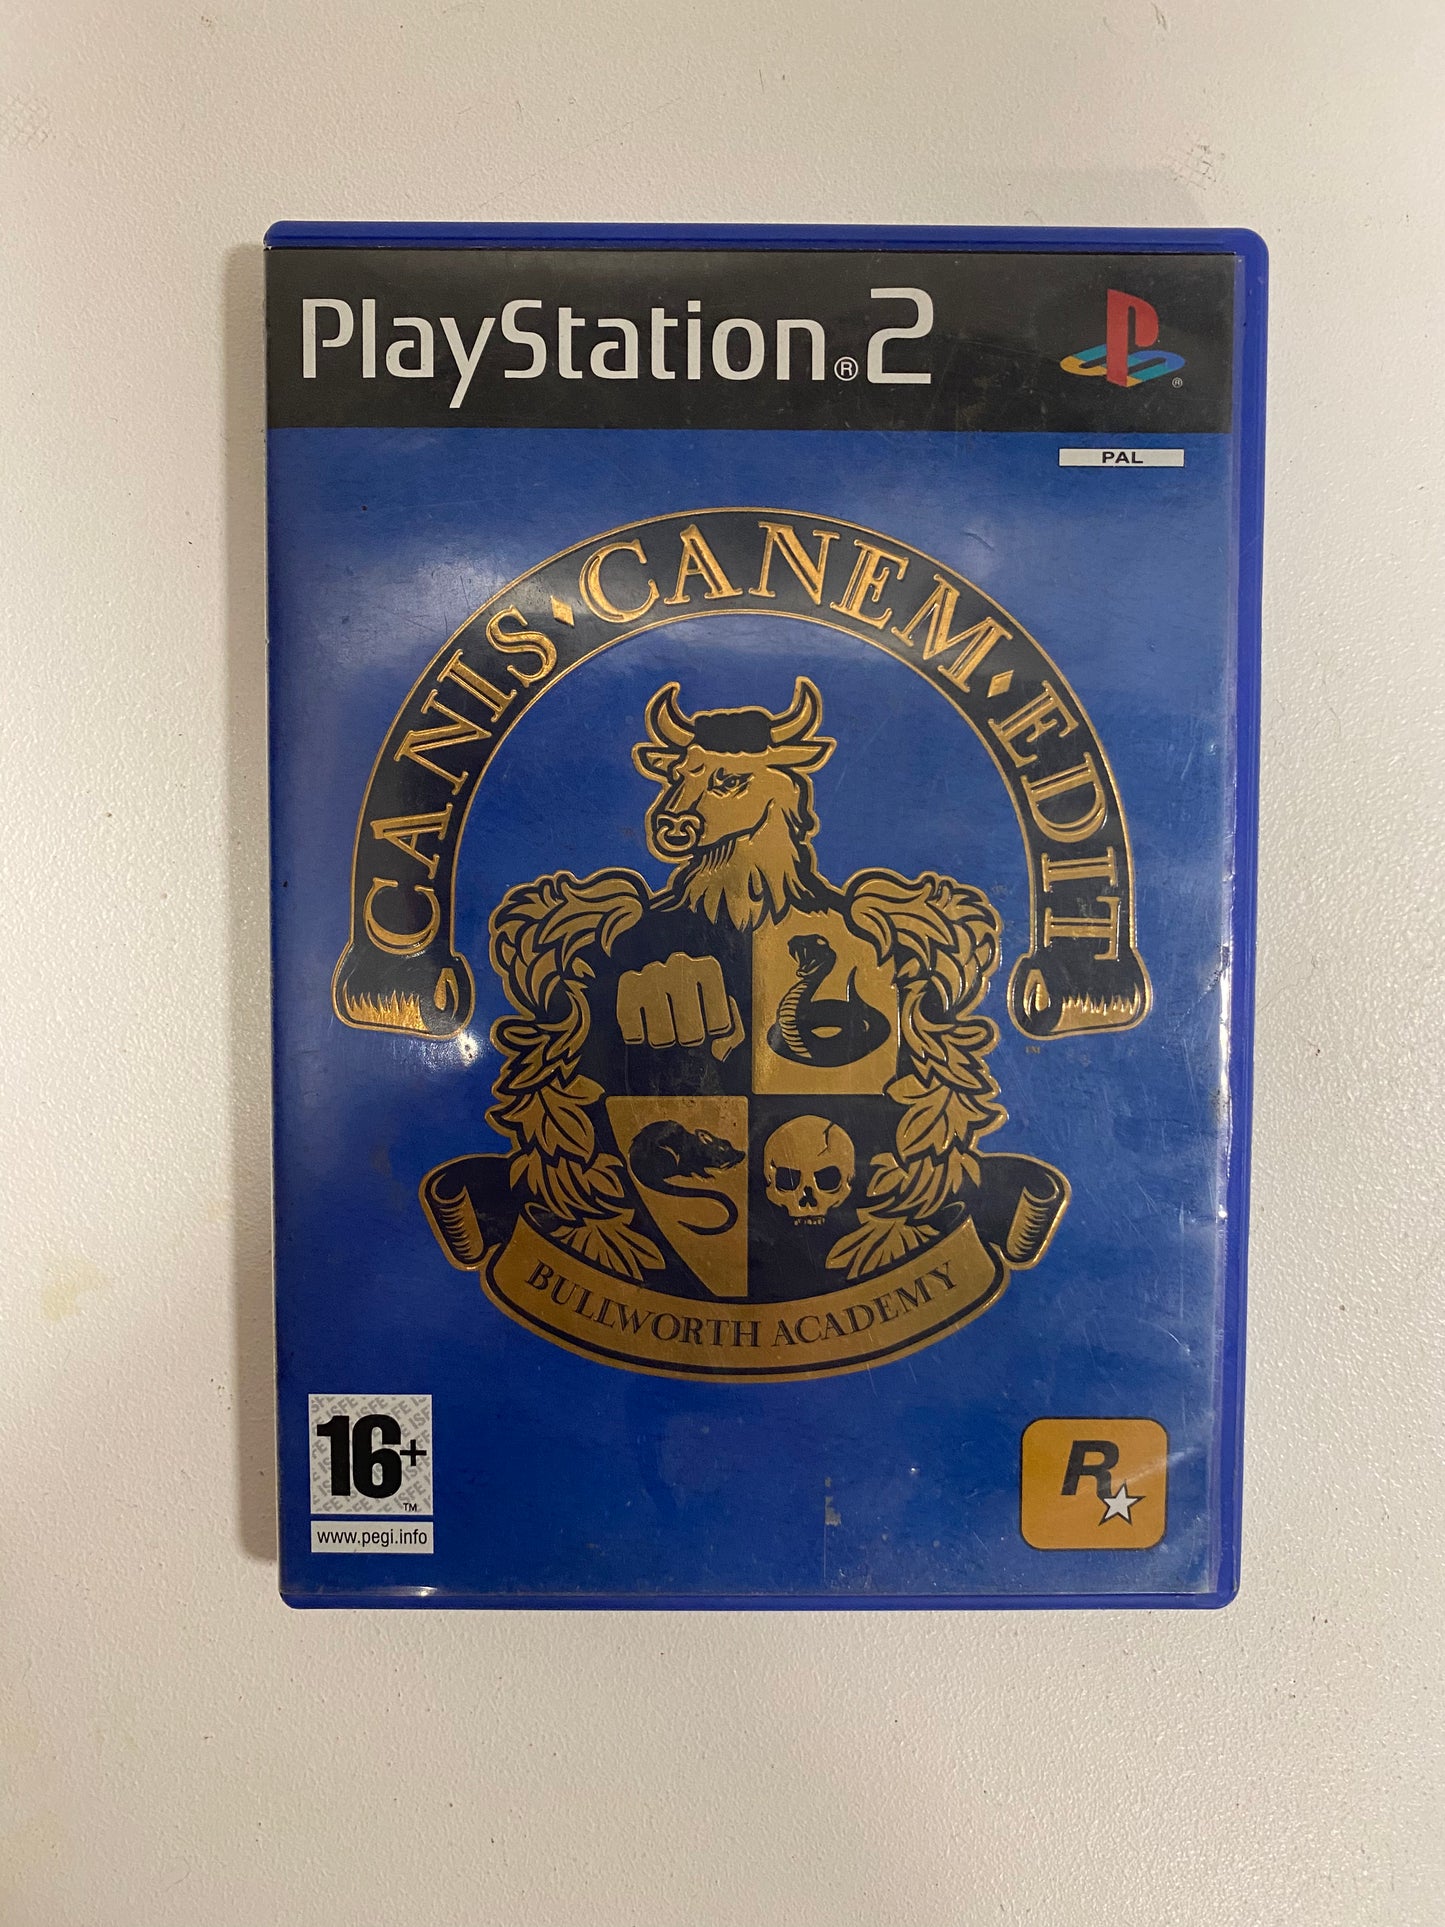 Canis canem edit sony ps2 complet